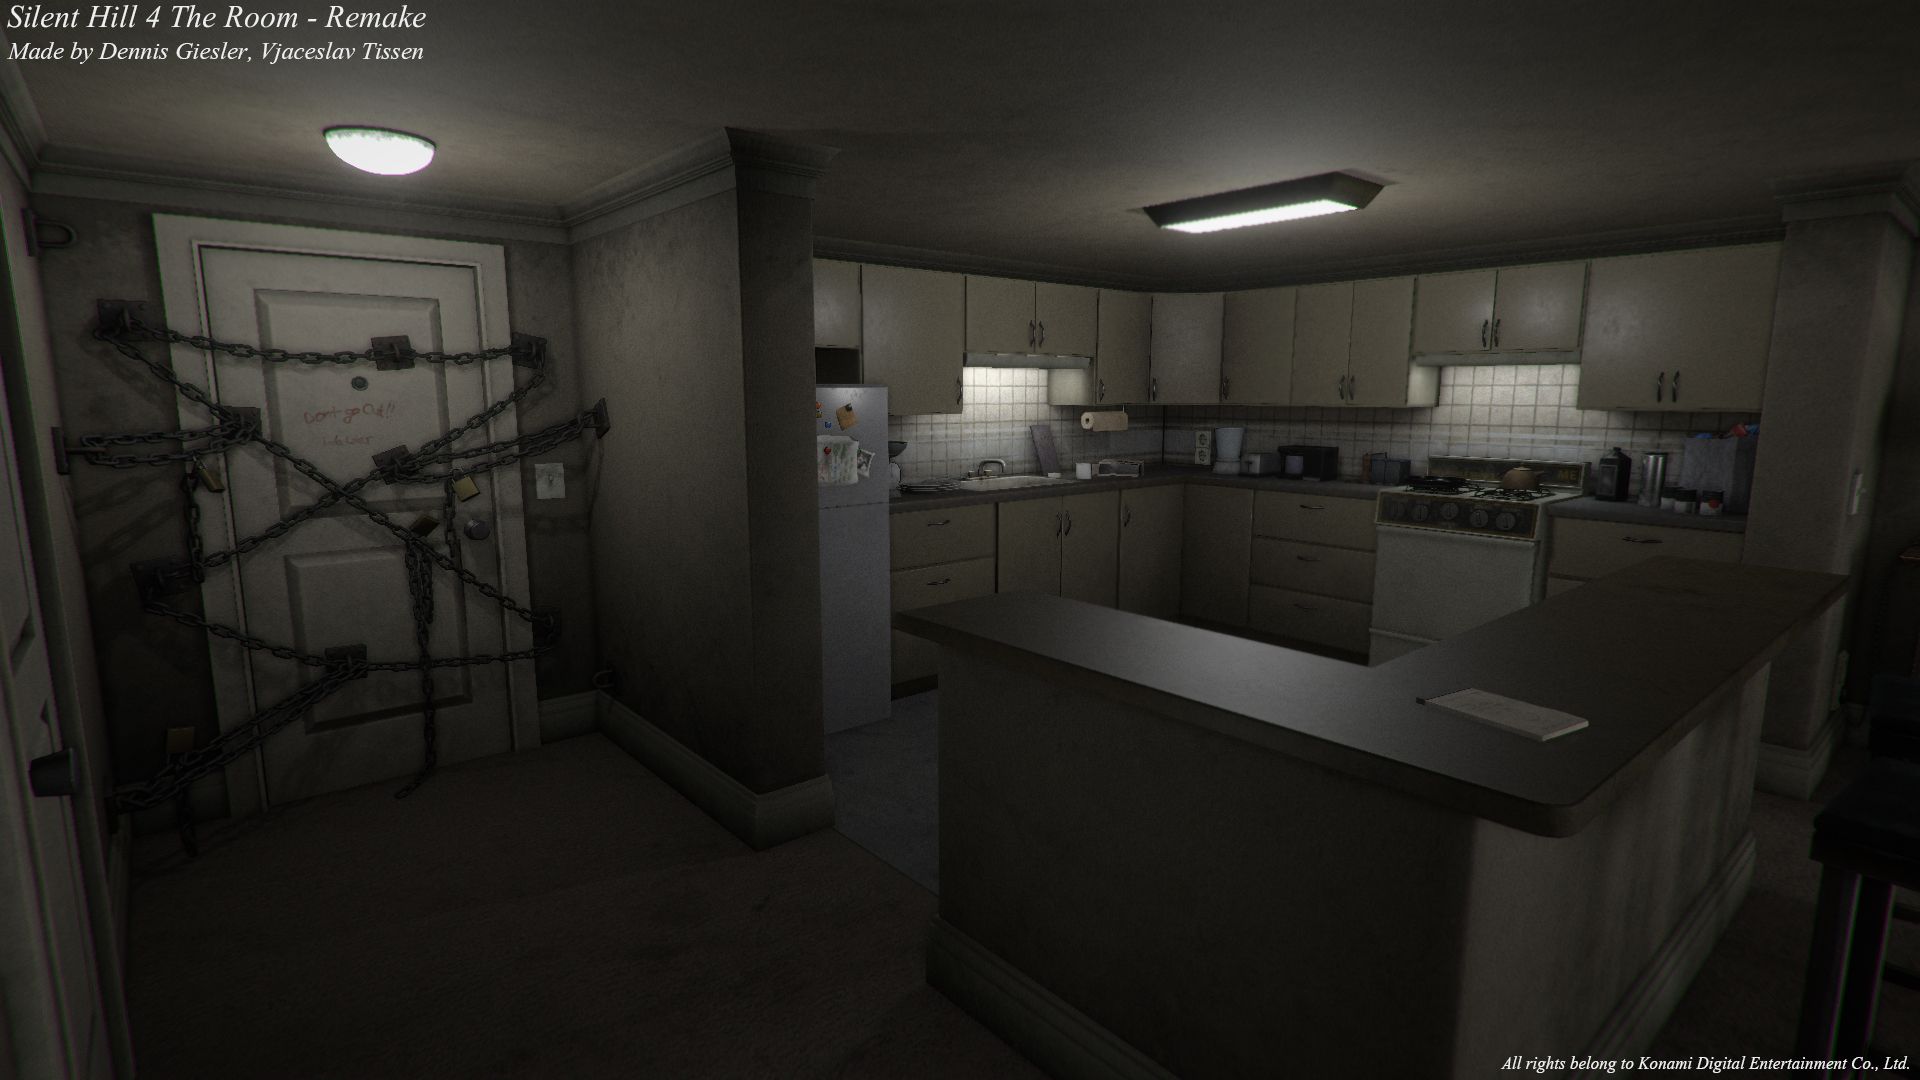 Silent Hill 4's creepy apartment recreated in Unity